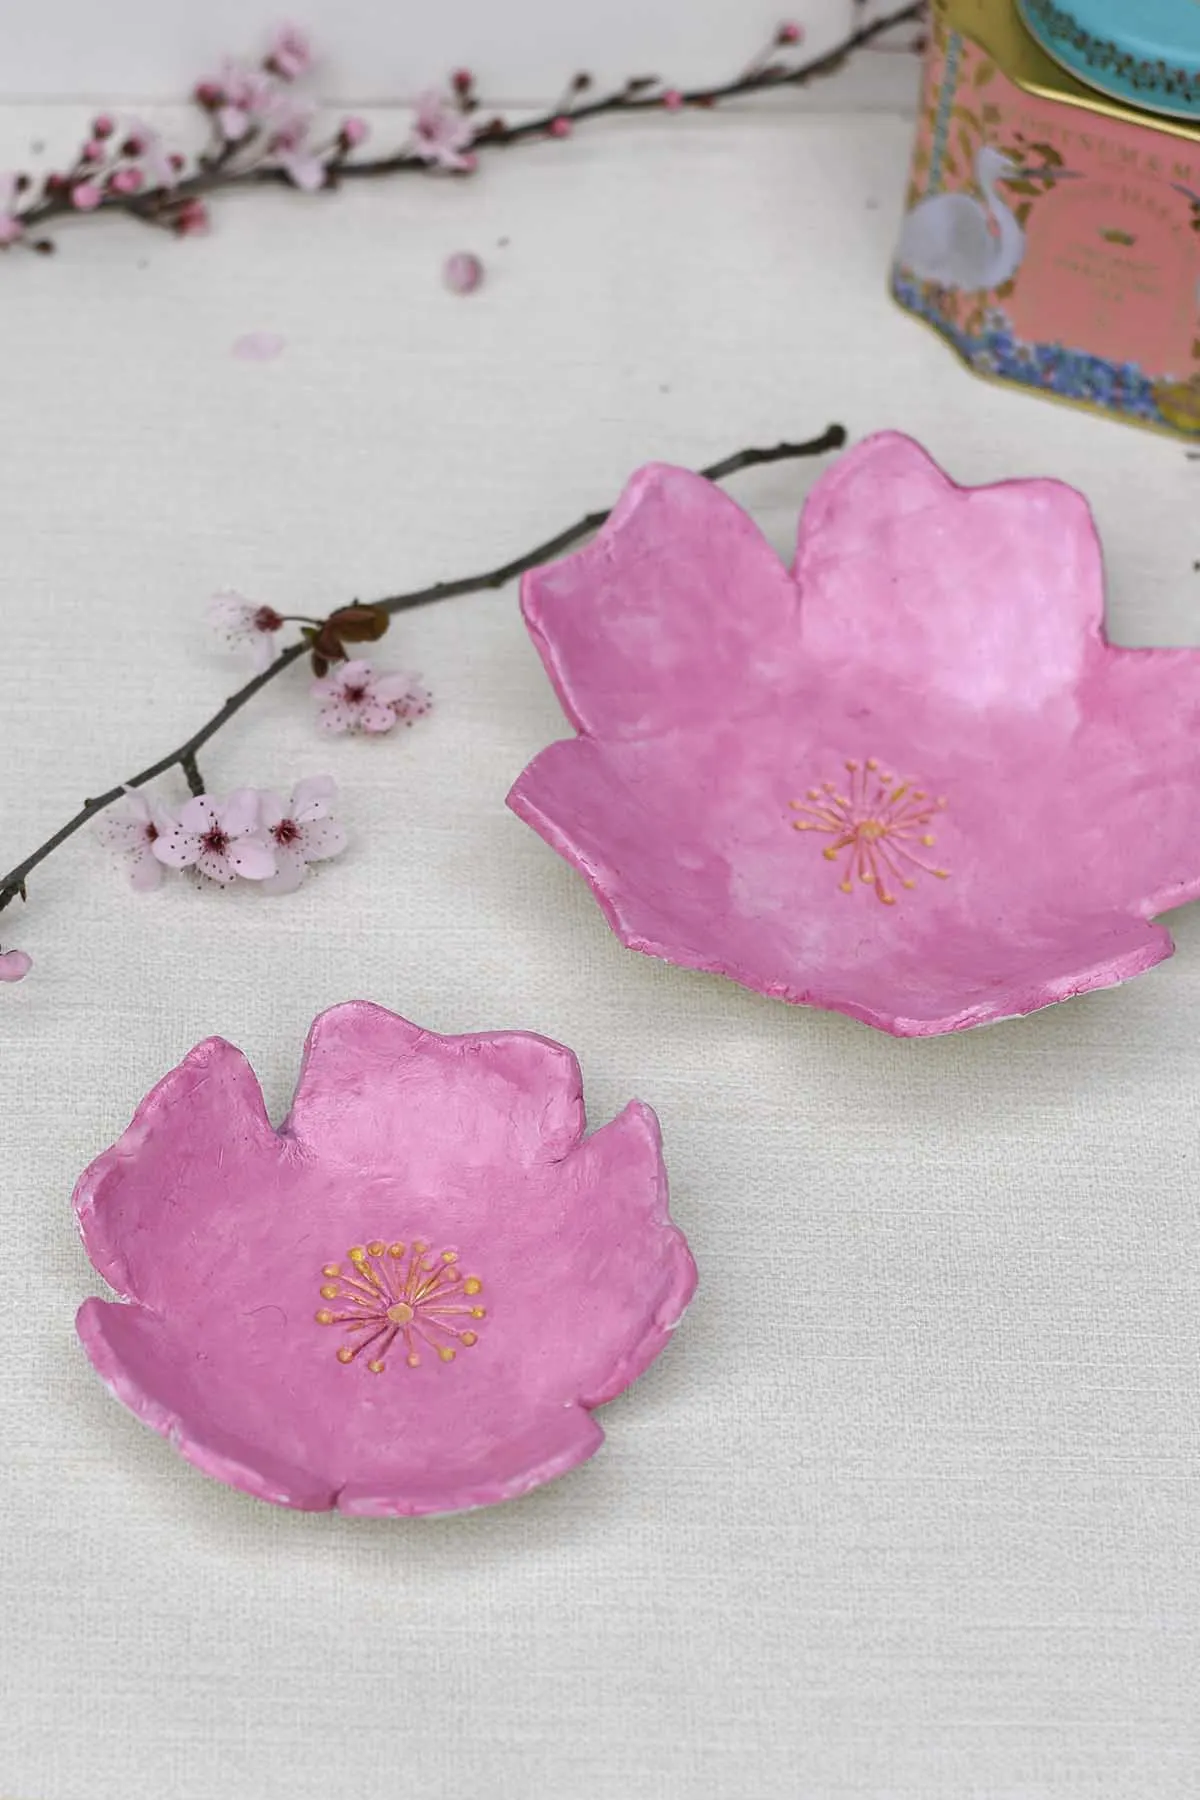 Cherry blossom clay ring / trinket bowls dishes in 2 sizes